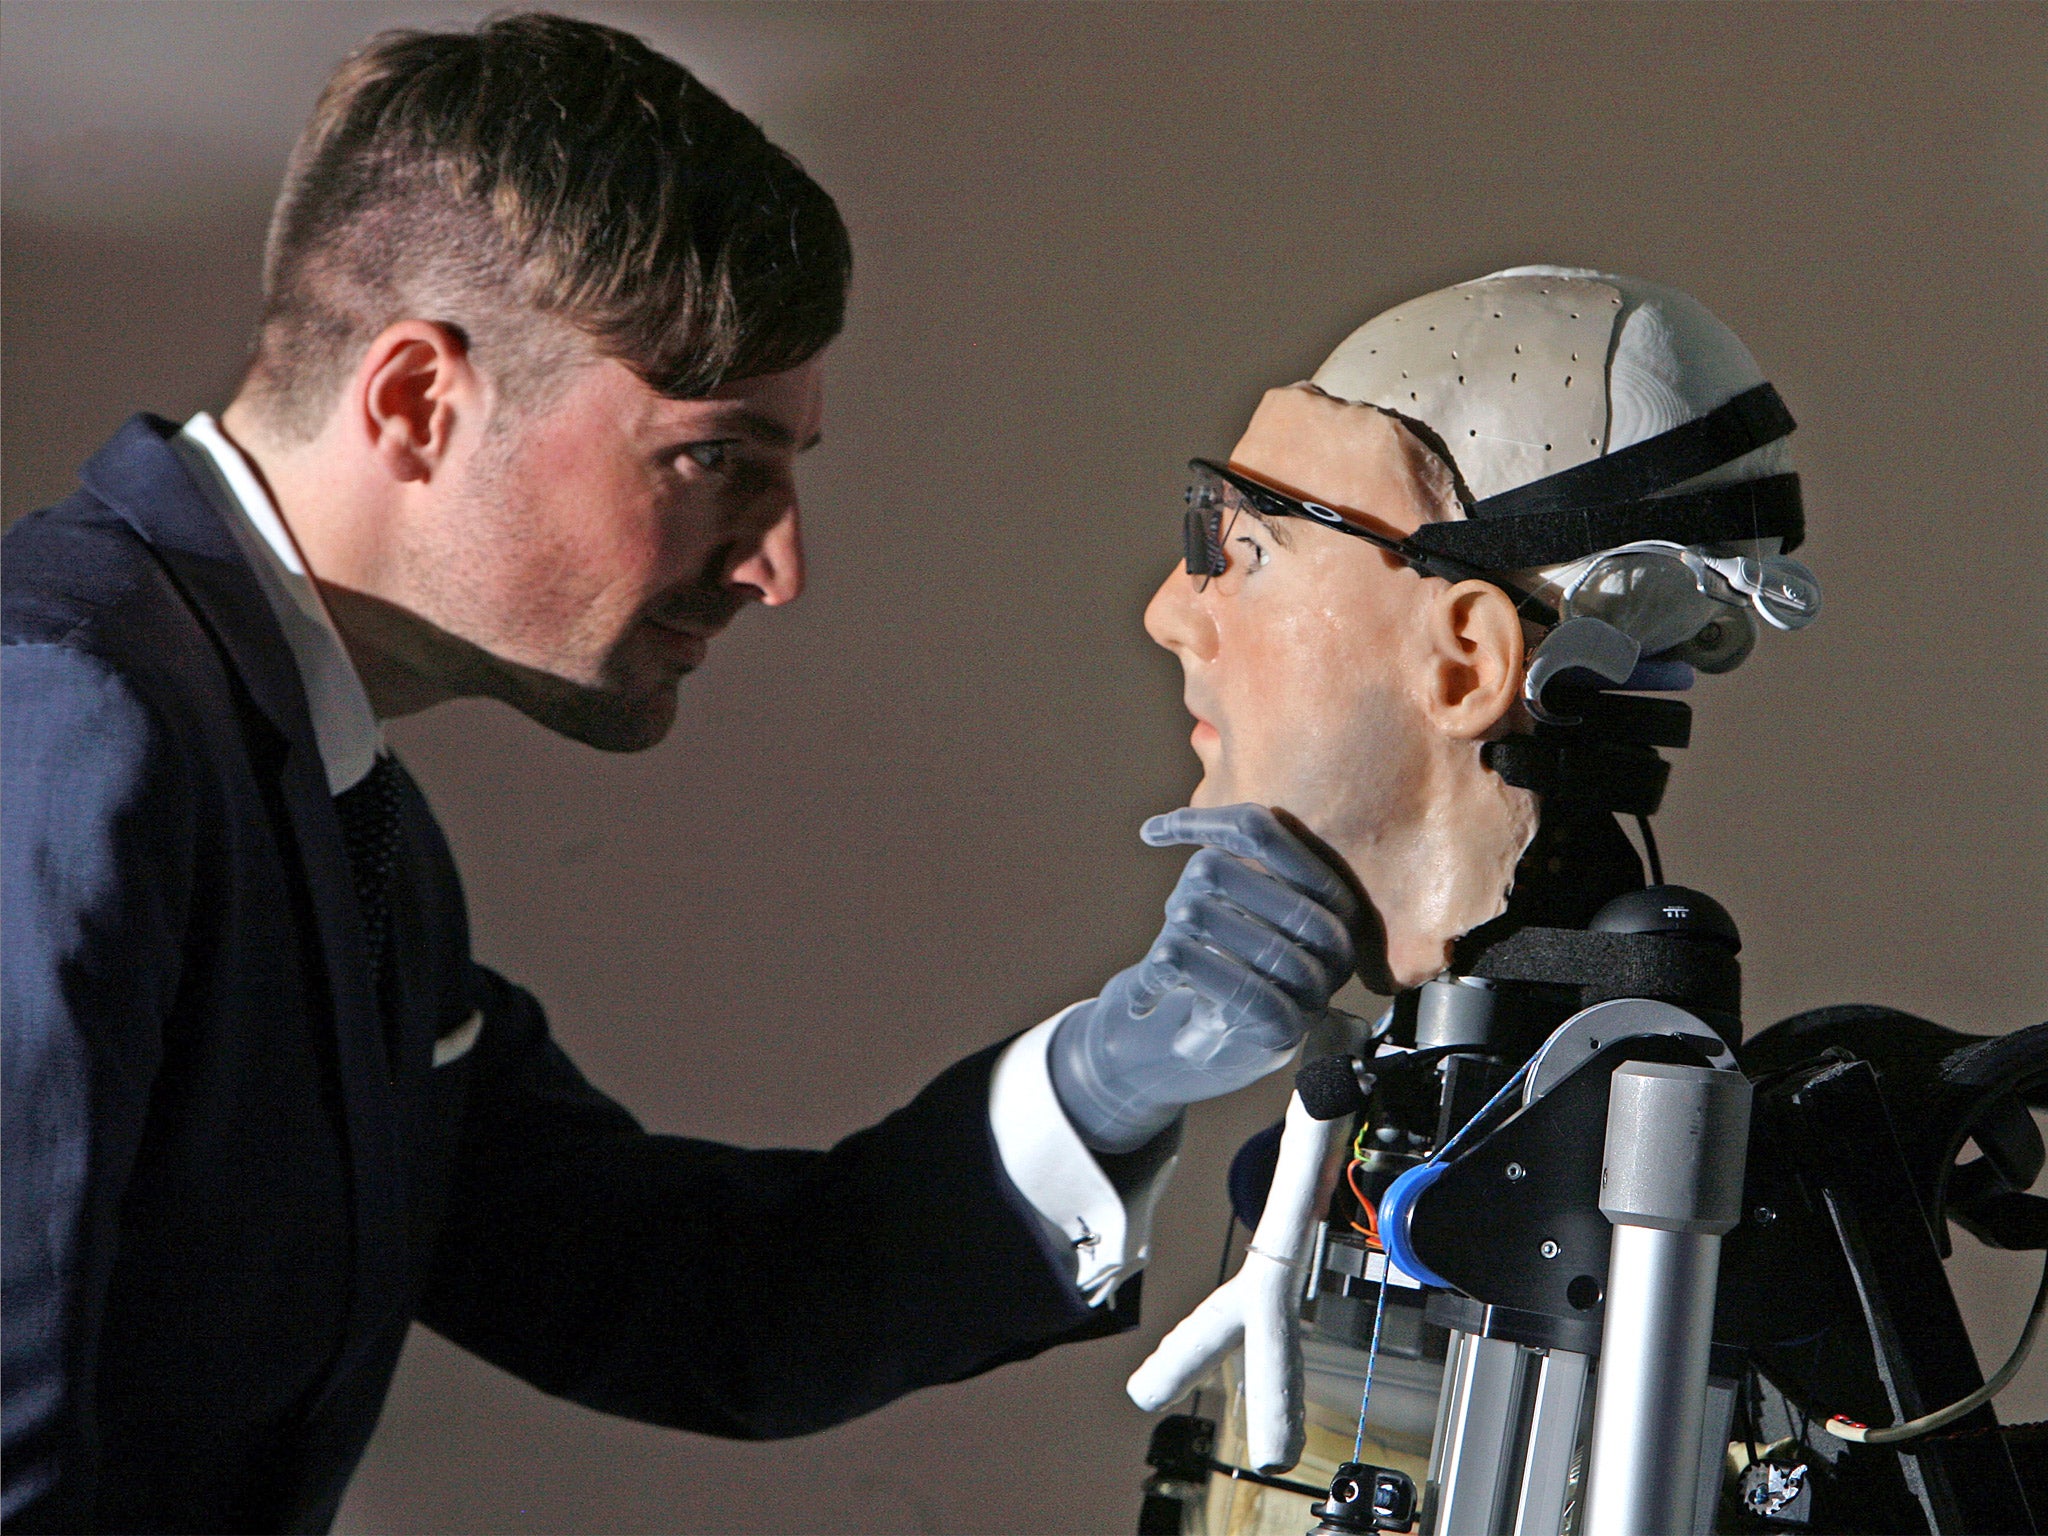 Documentary maker Bertolt Meyer (who has a bionic hand) is pictured examining 'Rex'